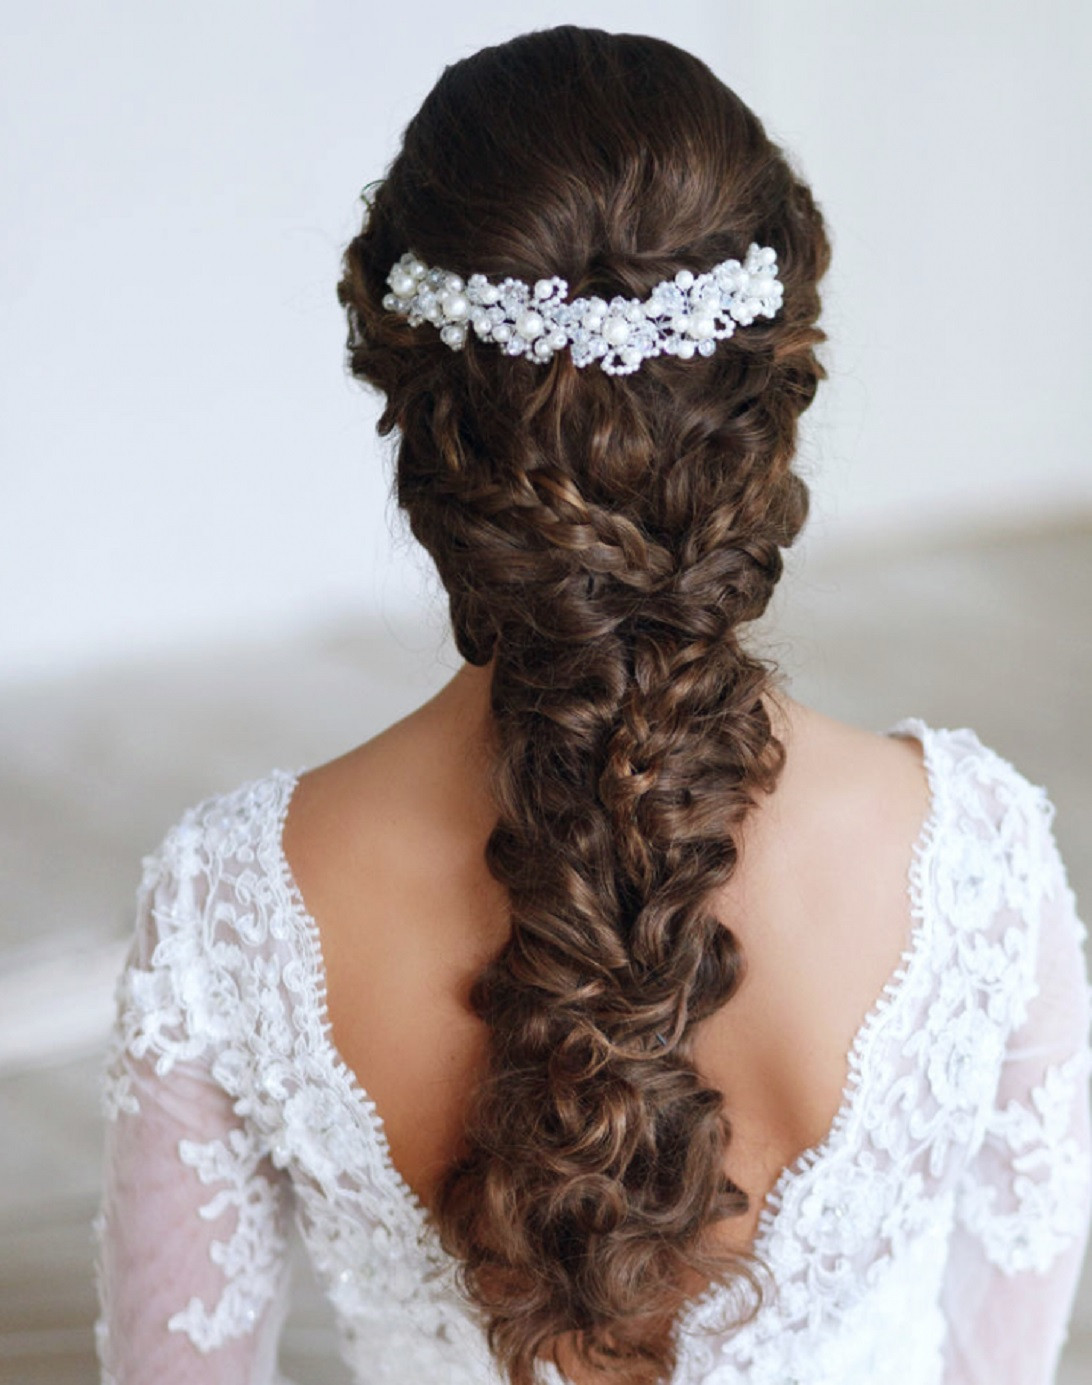 Wedding Hairstyle With Braid
 6 Bridal Hairstyle Tips for Your Big day